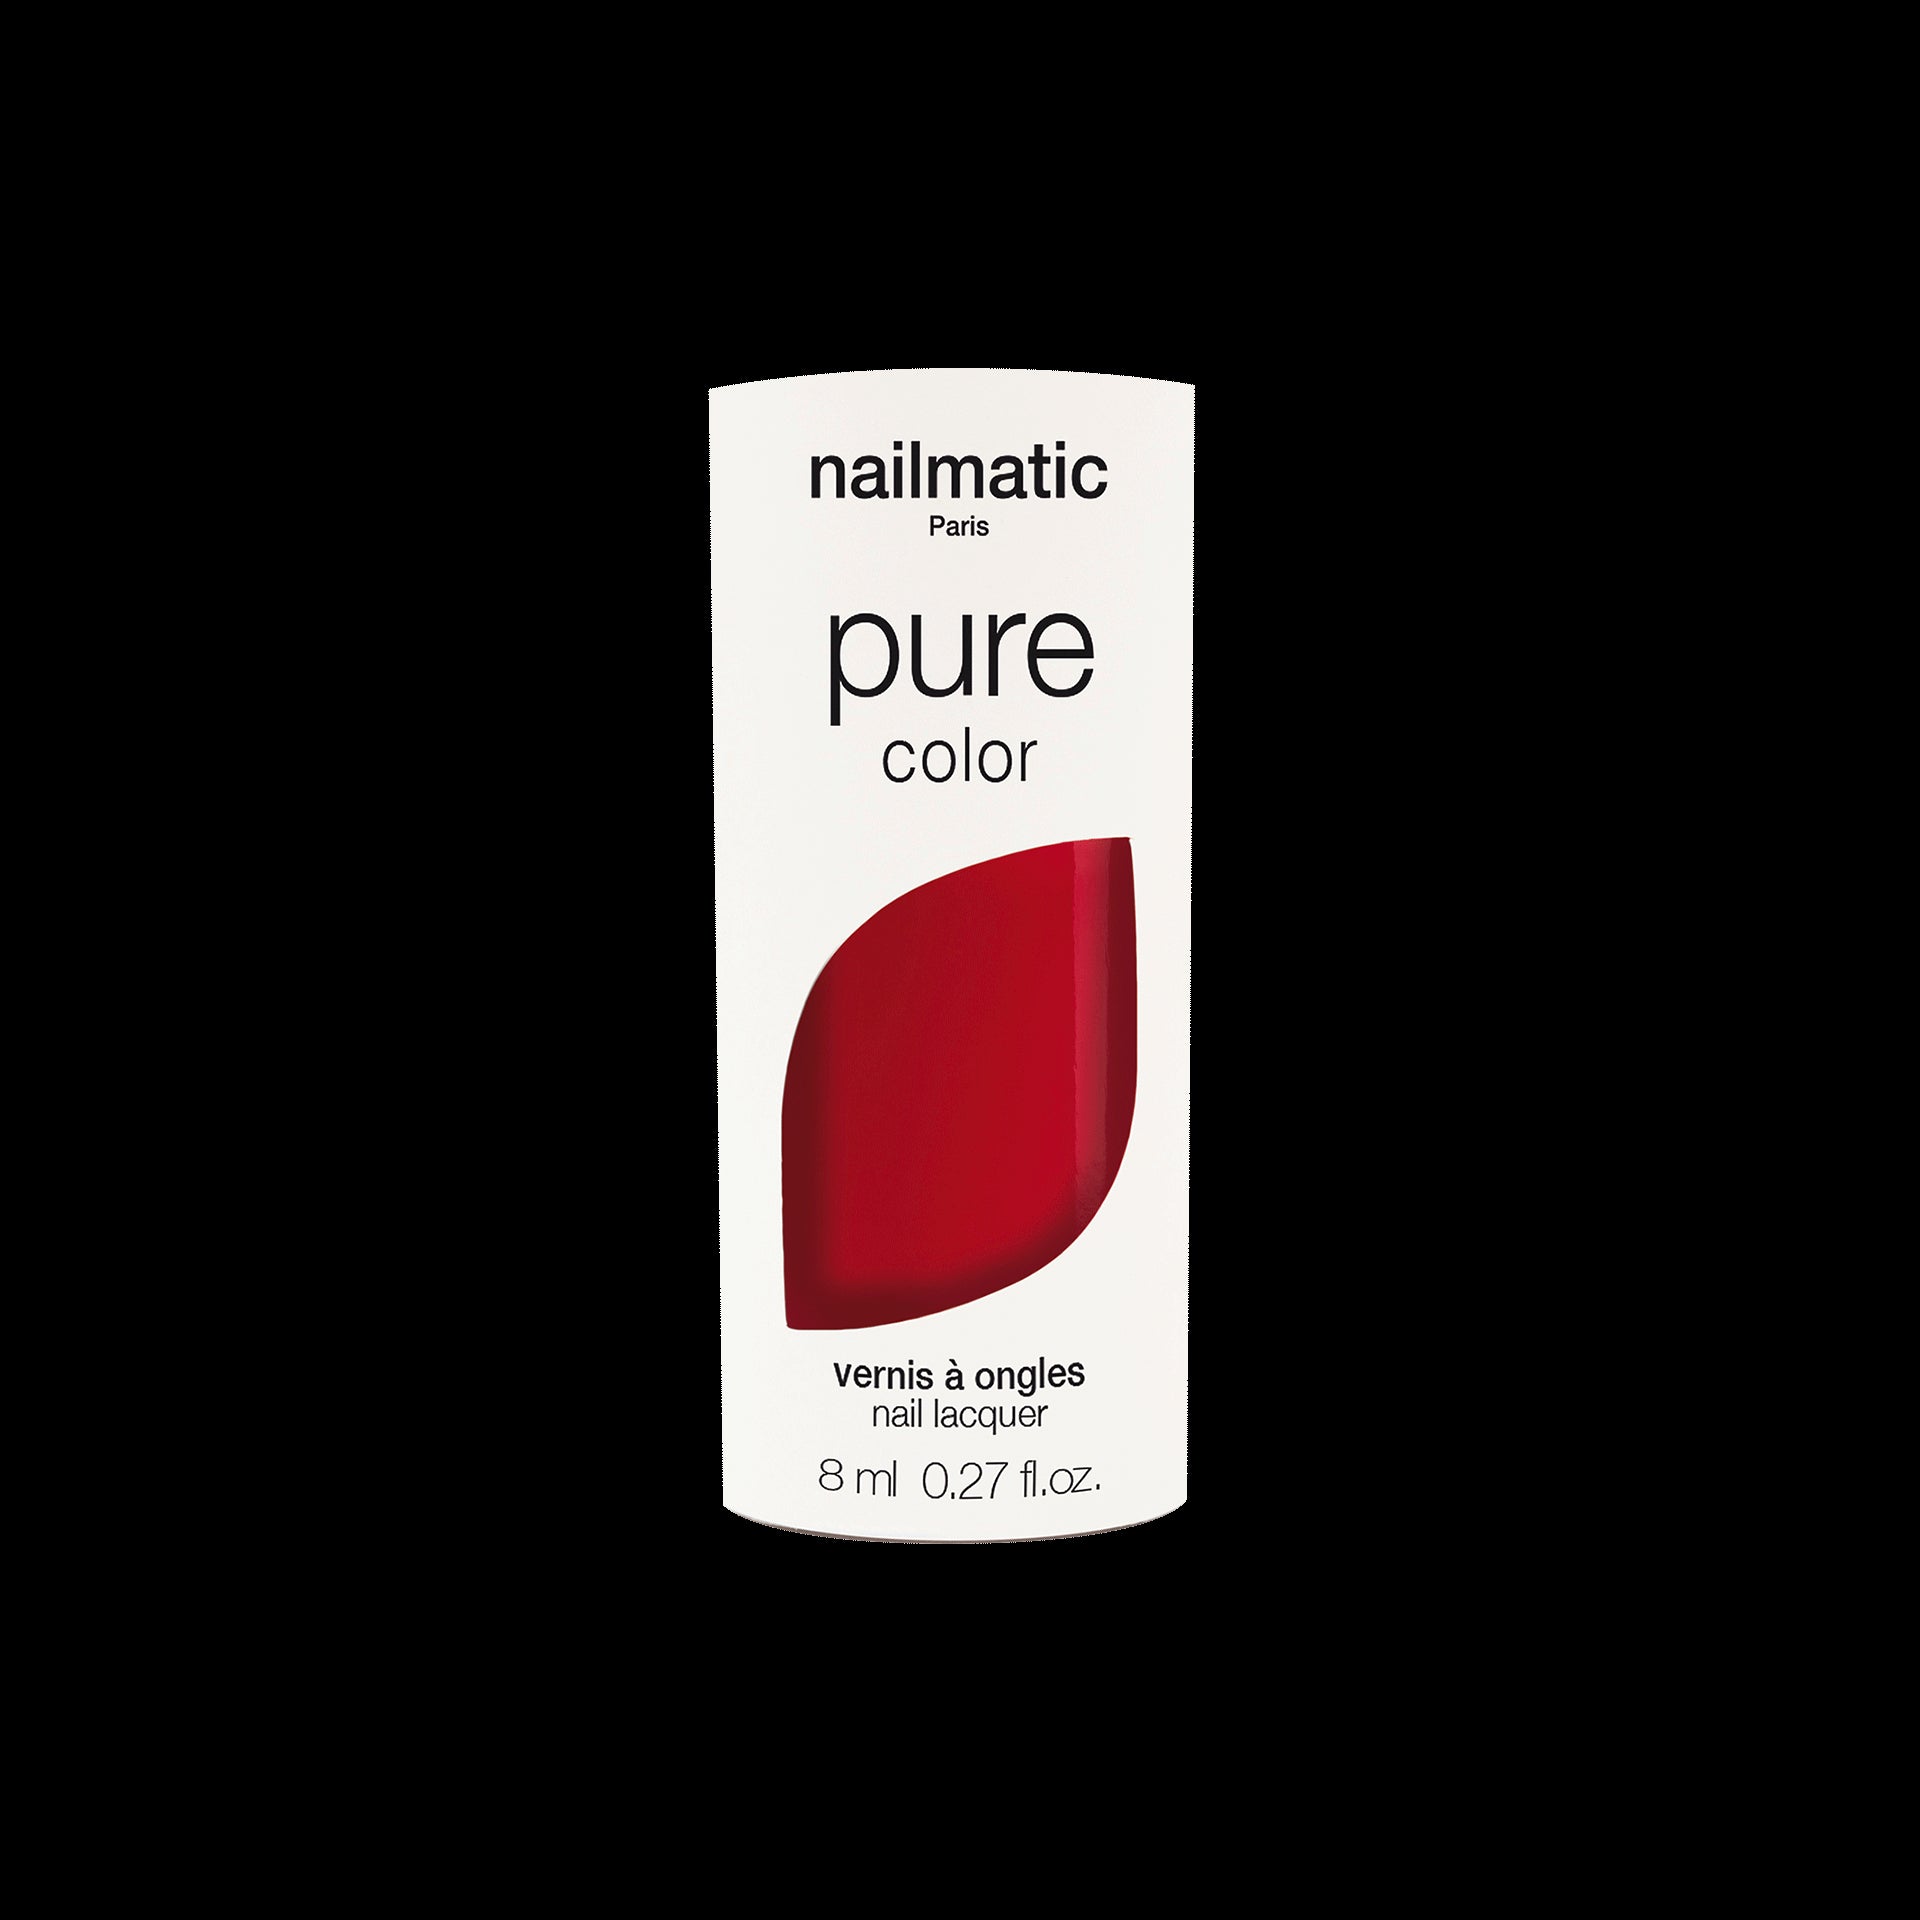 Pure Red nail polish Dita Pure Color with packaging